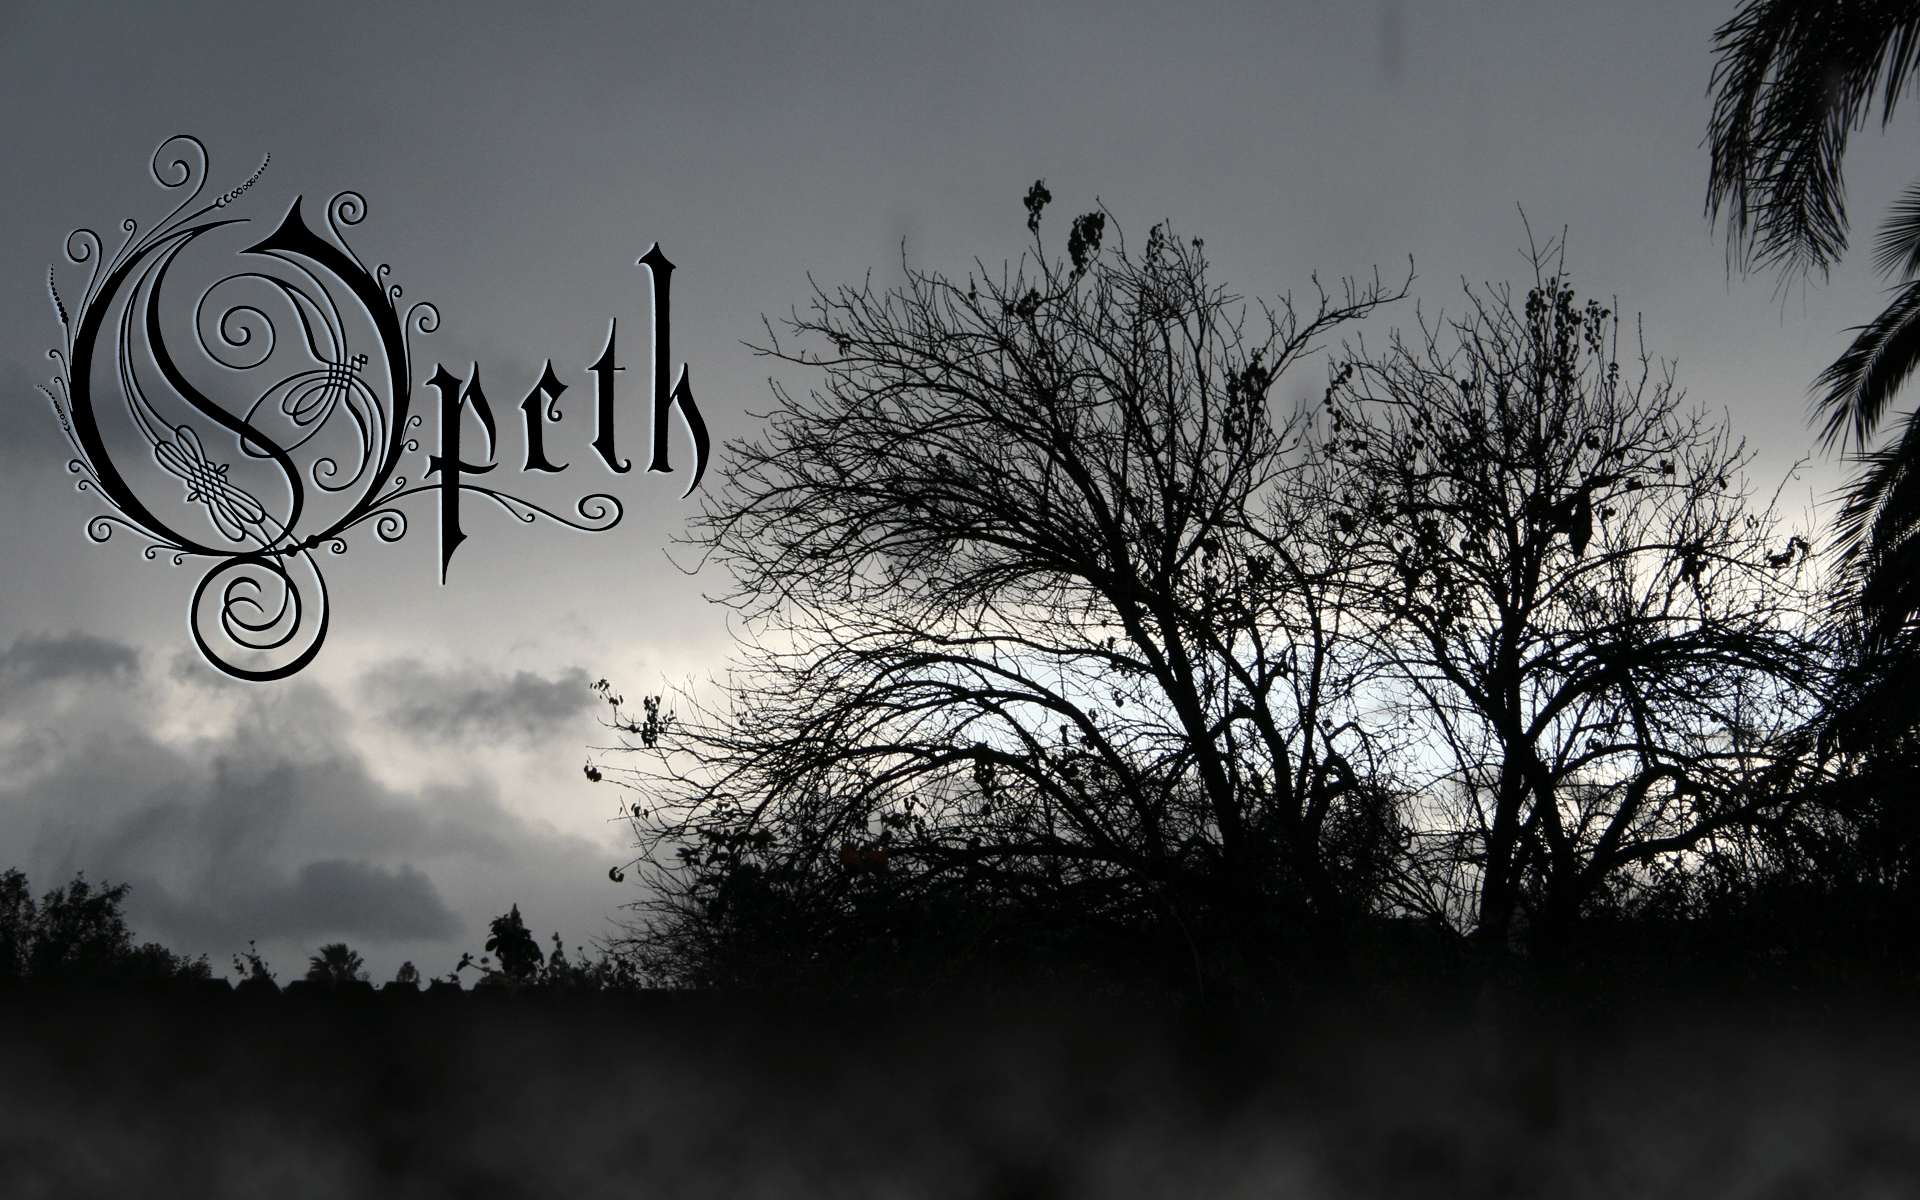 image about Opeth & Friends